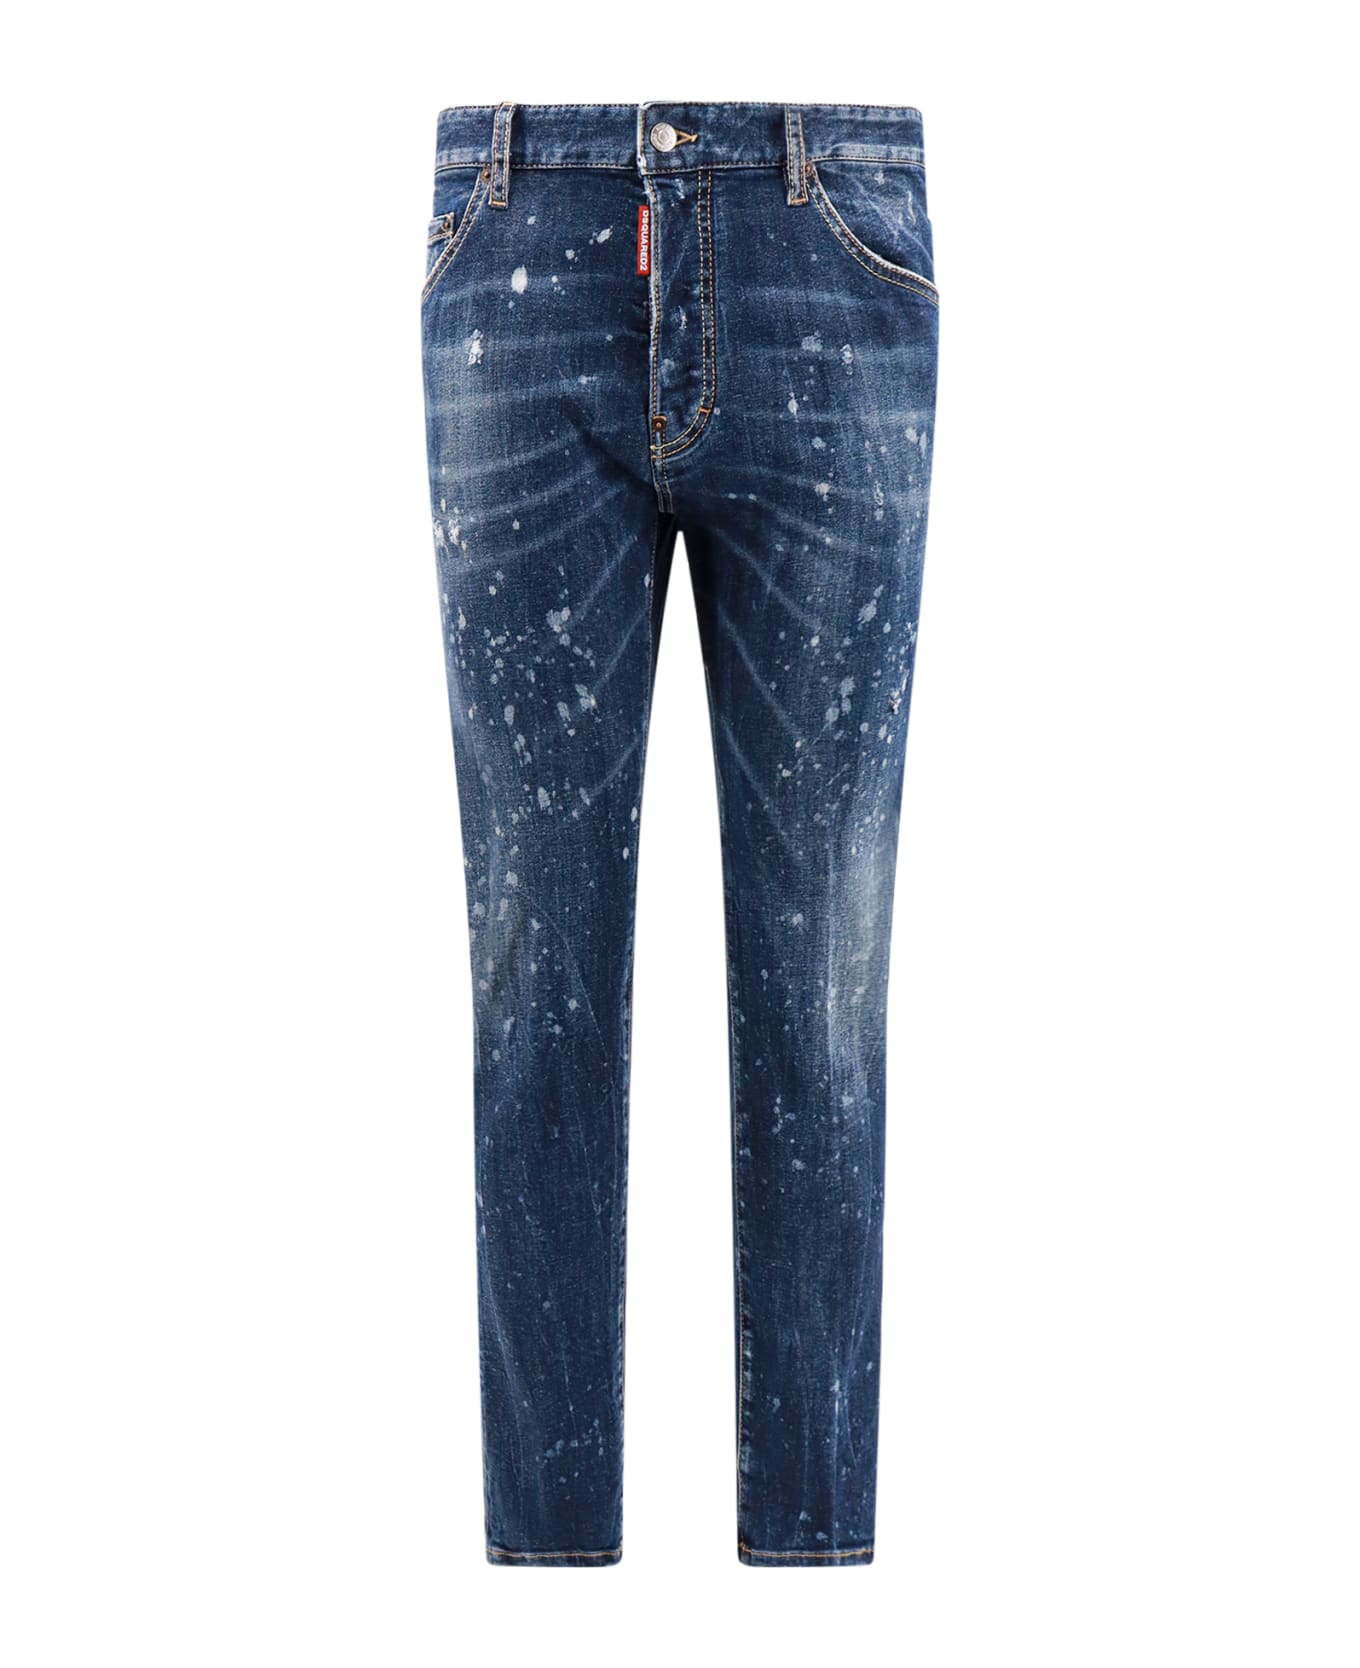 Dsquared2 Cool Guy Jean Jeans - Blue デニム